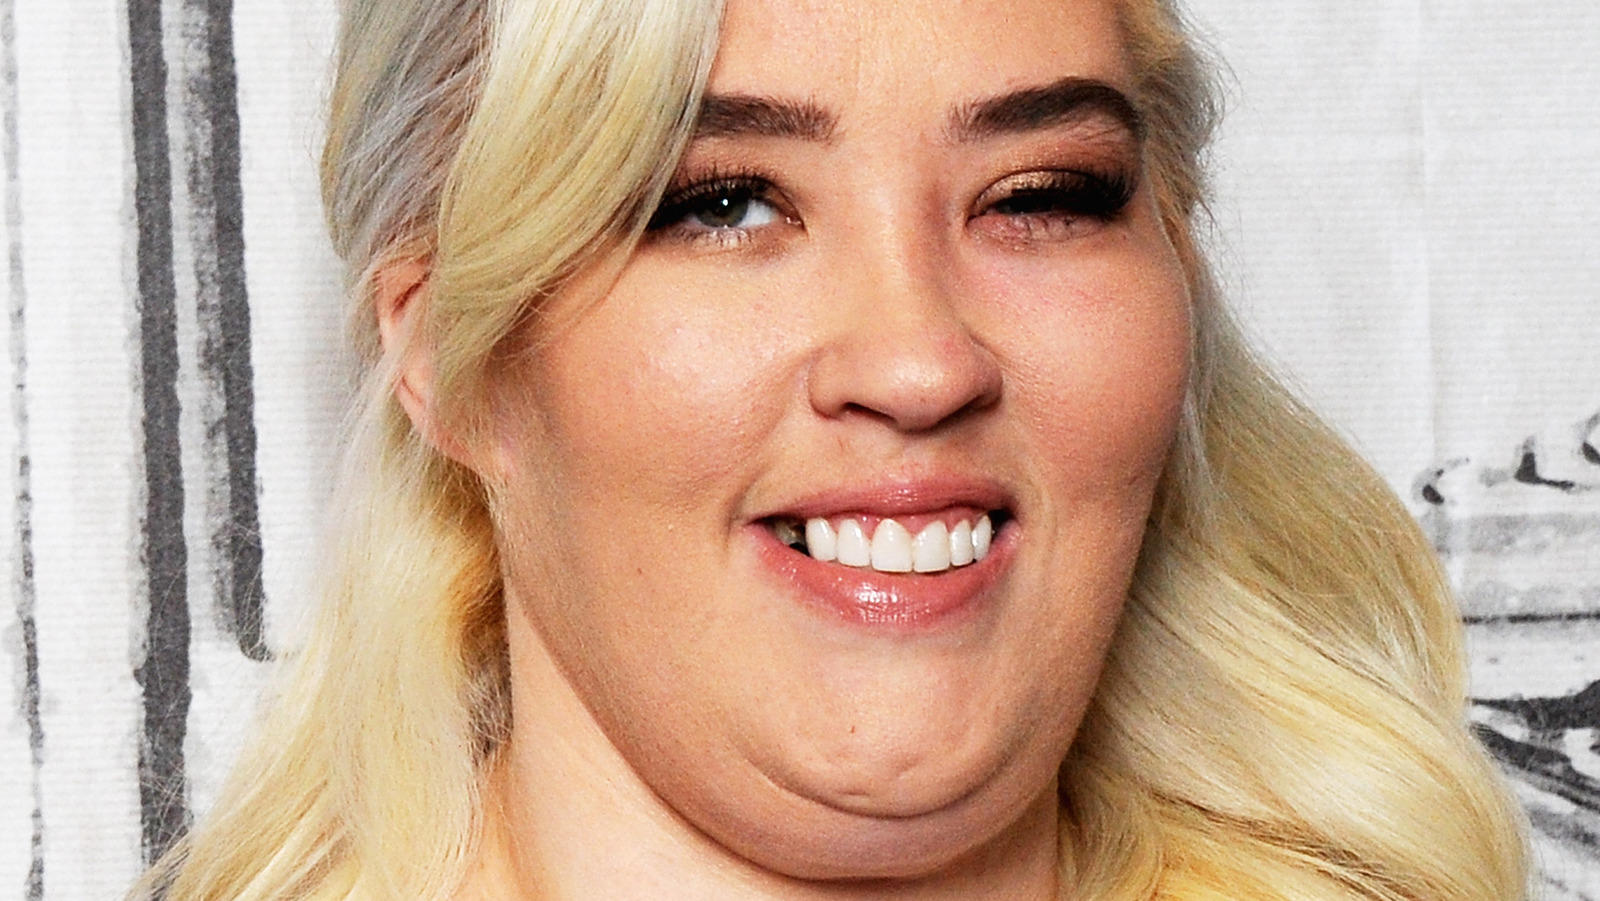 Heres How Mama June Responded To Honey Boo Boos Haters 